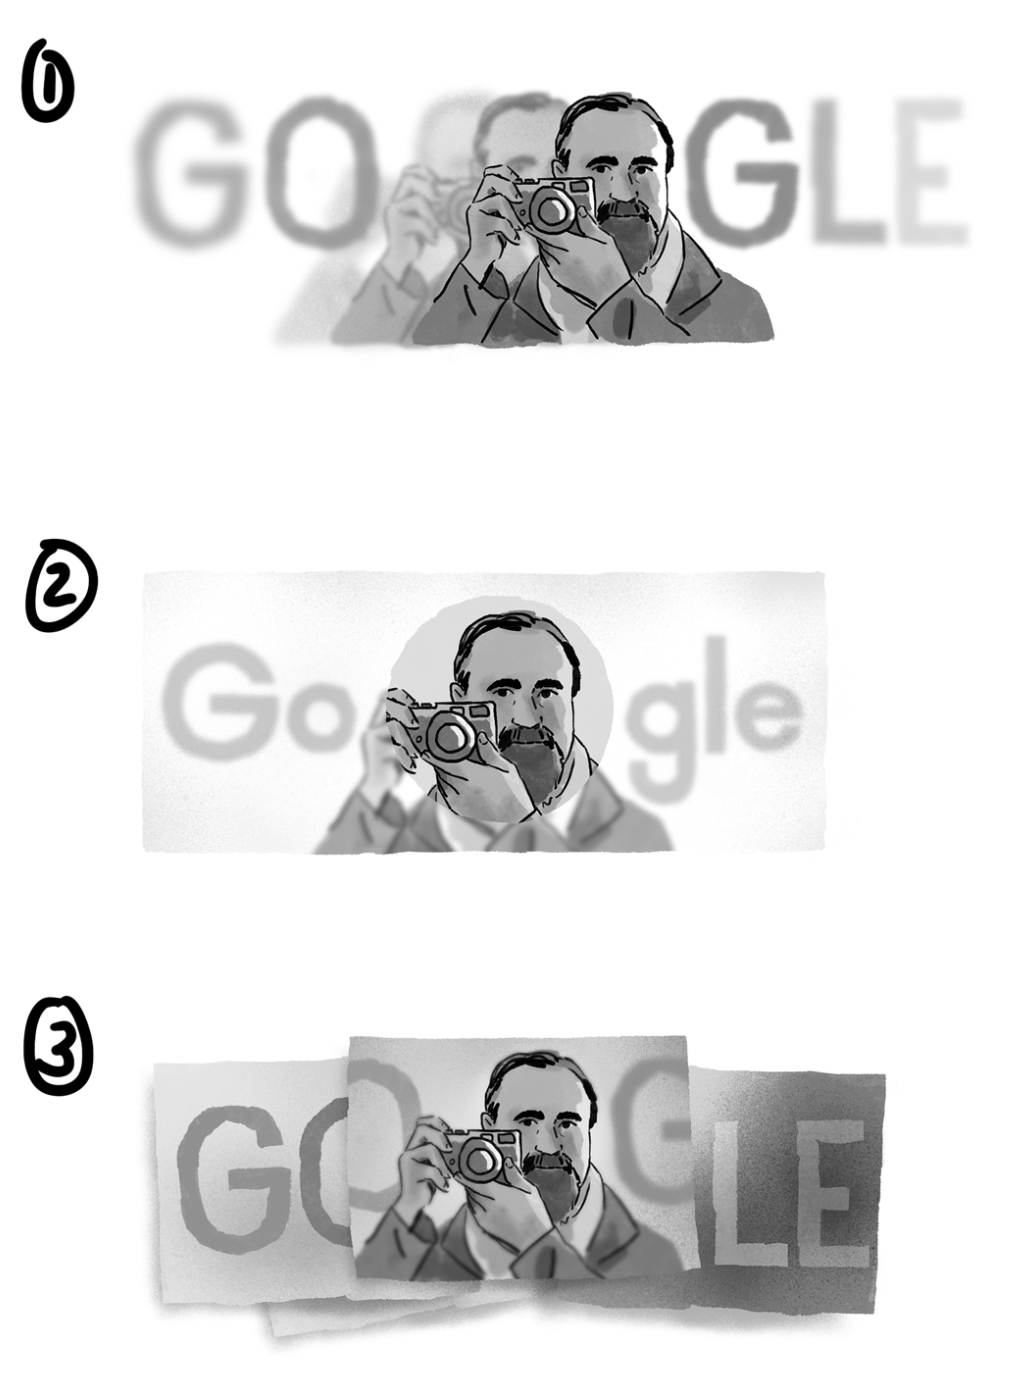 Three black and white illustrations of Abbas Attar with the Google letters labeled one through 3